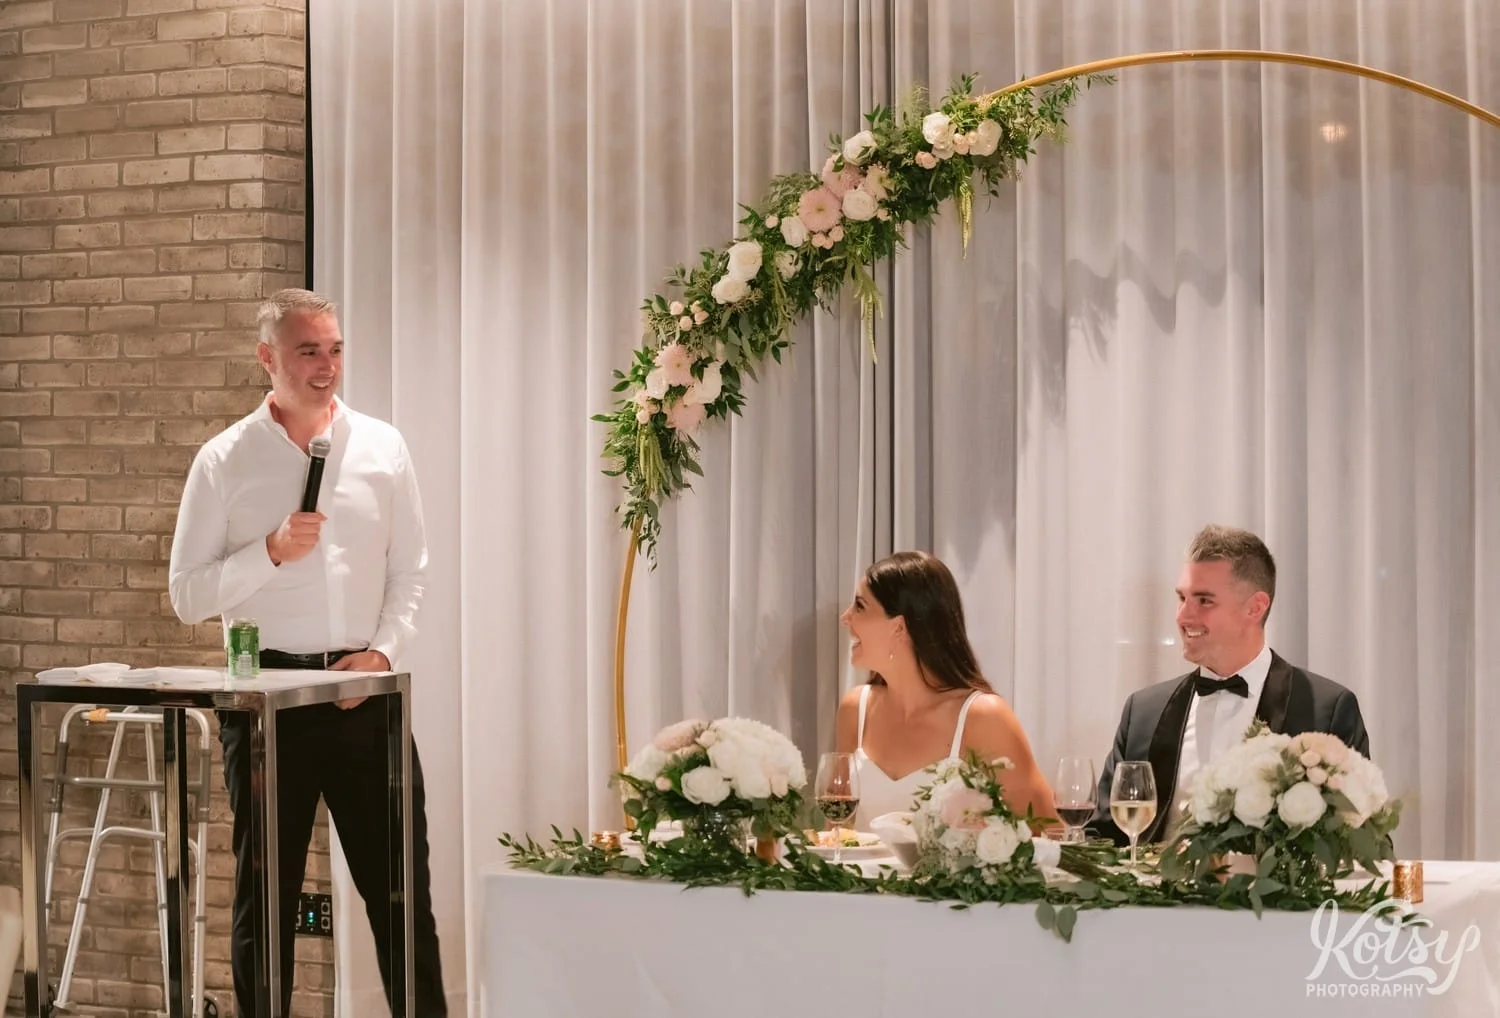 A man in a white shirt smiles as he makes a speech to a bride and groom during their Village Loft wedding reception in Toronto, Canada